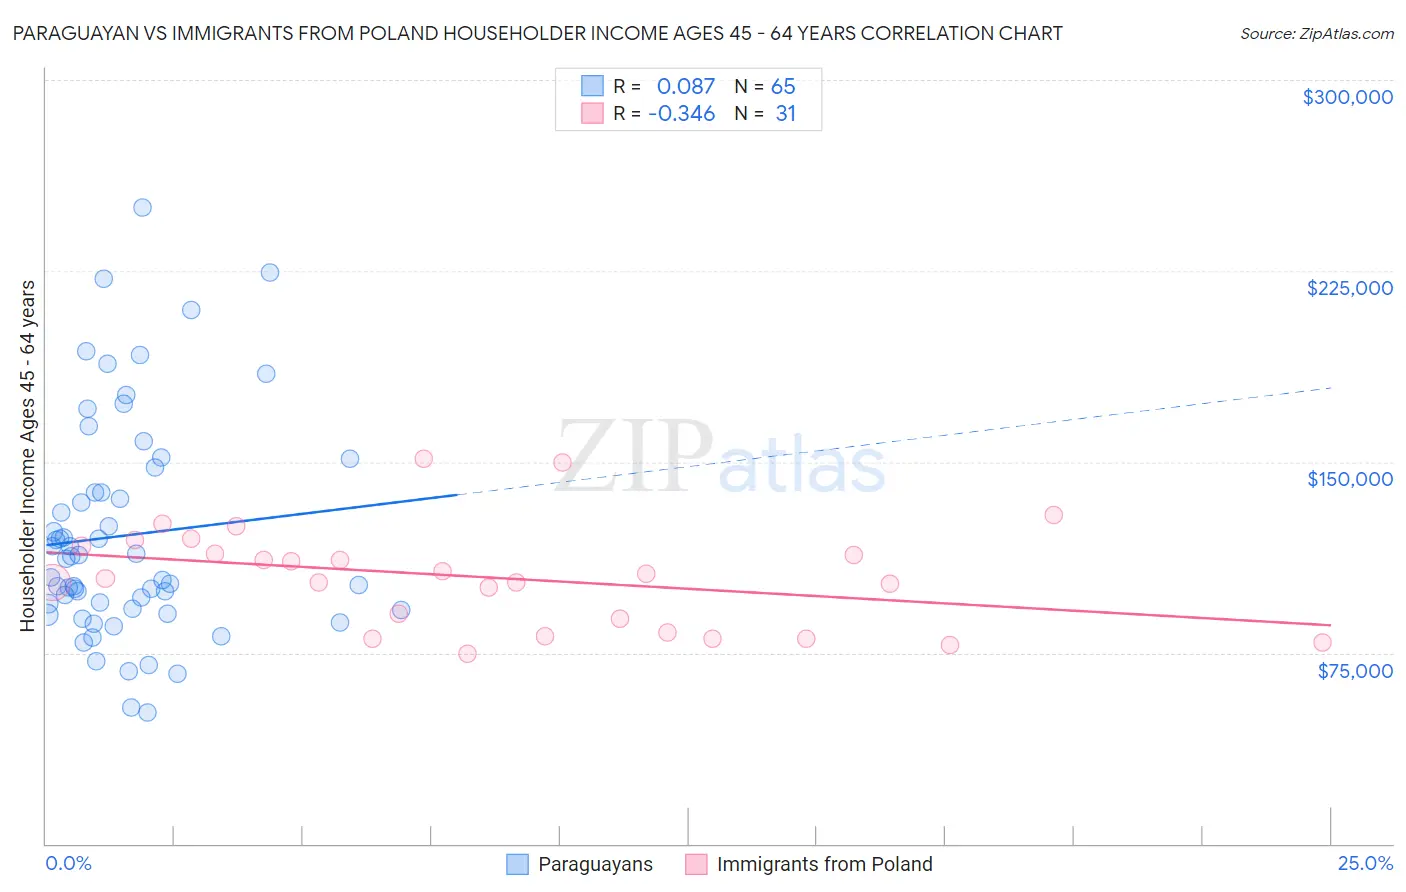 Paraguayan vs Immigrants from Poland Householder Income Ages 45 - 64 years